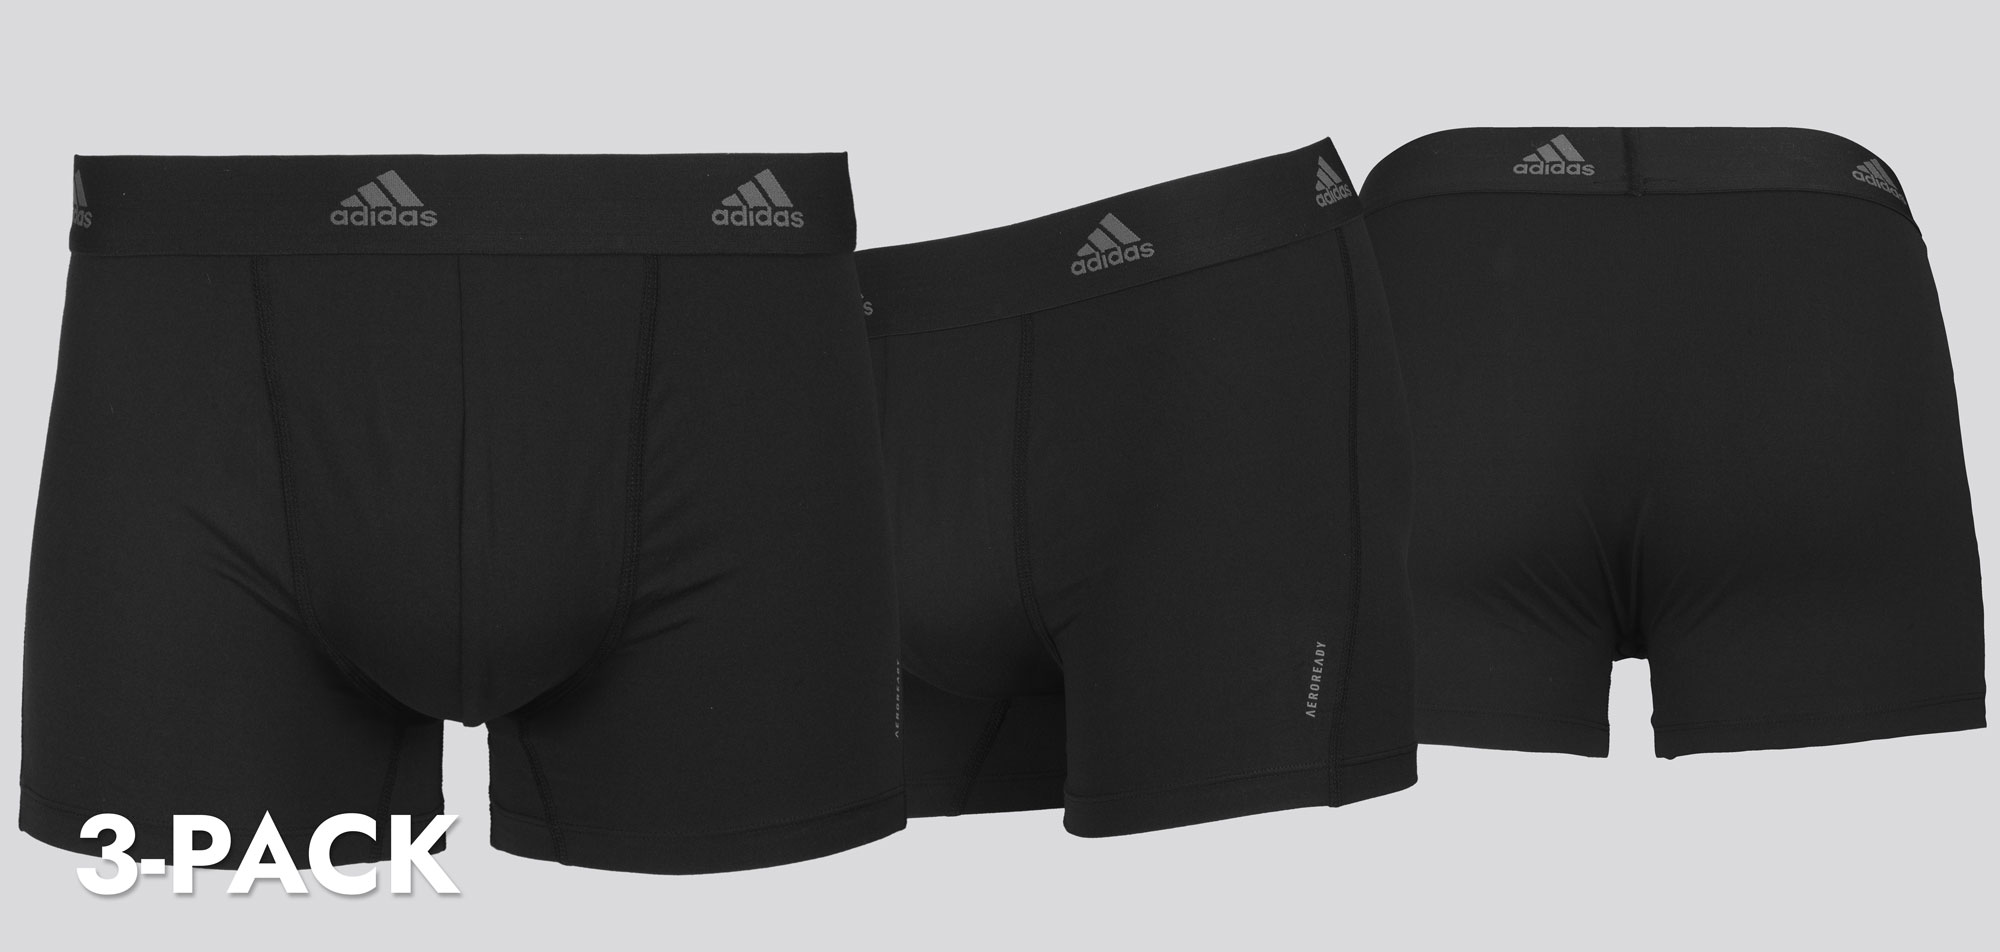 Adidas Trunk 3-Pack 4A3M02 Active Micro Flex Eco - Yourunderwearstore